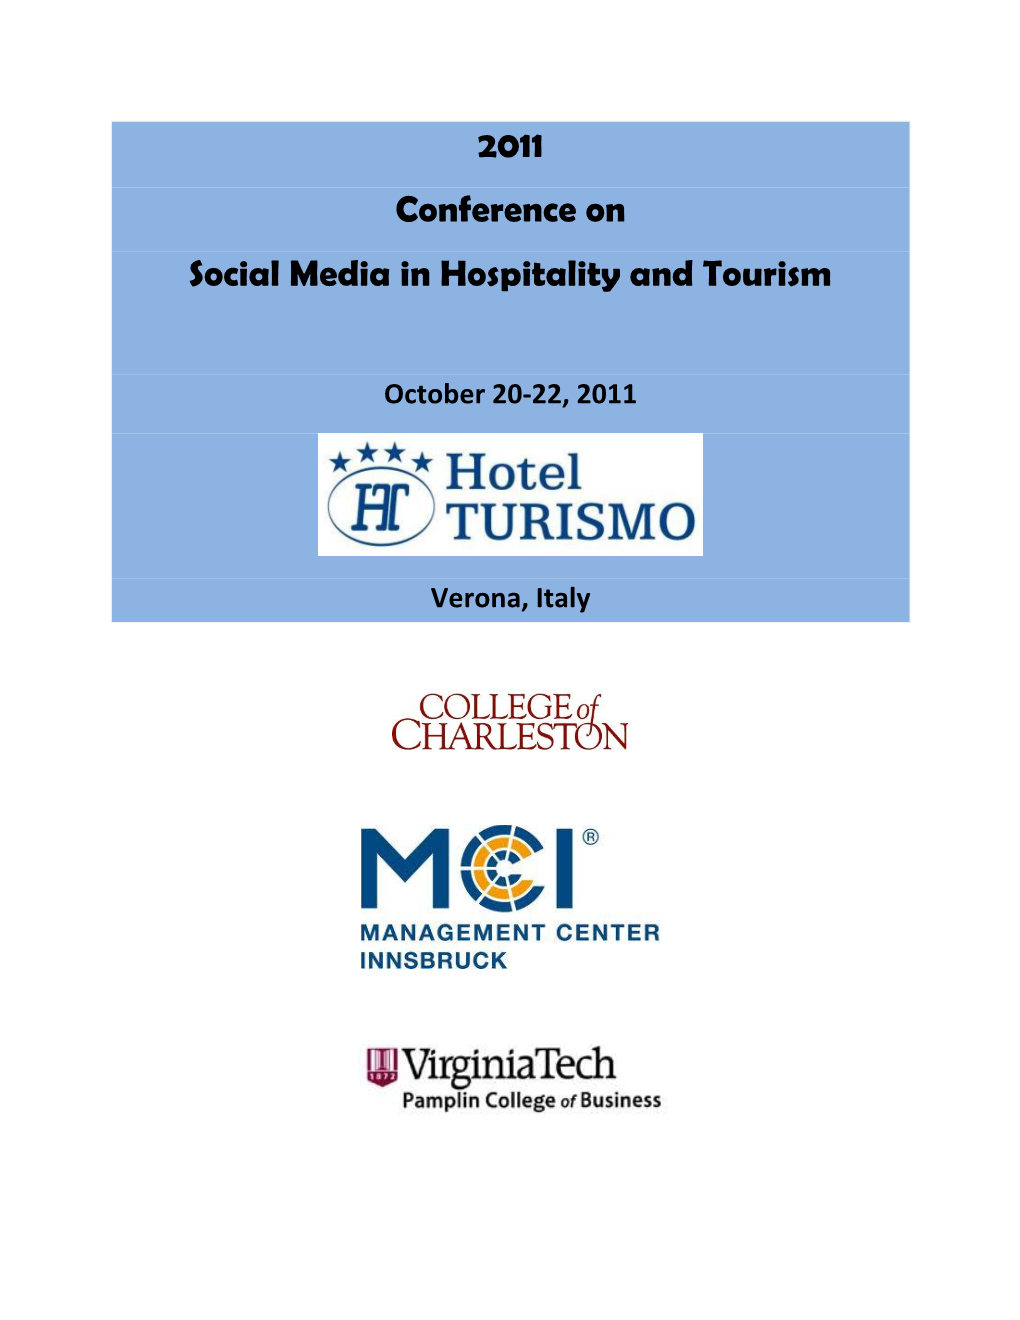 2011 Conference on Social Media in Hospitality and Tourism